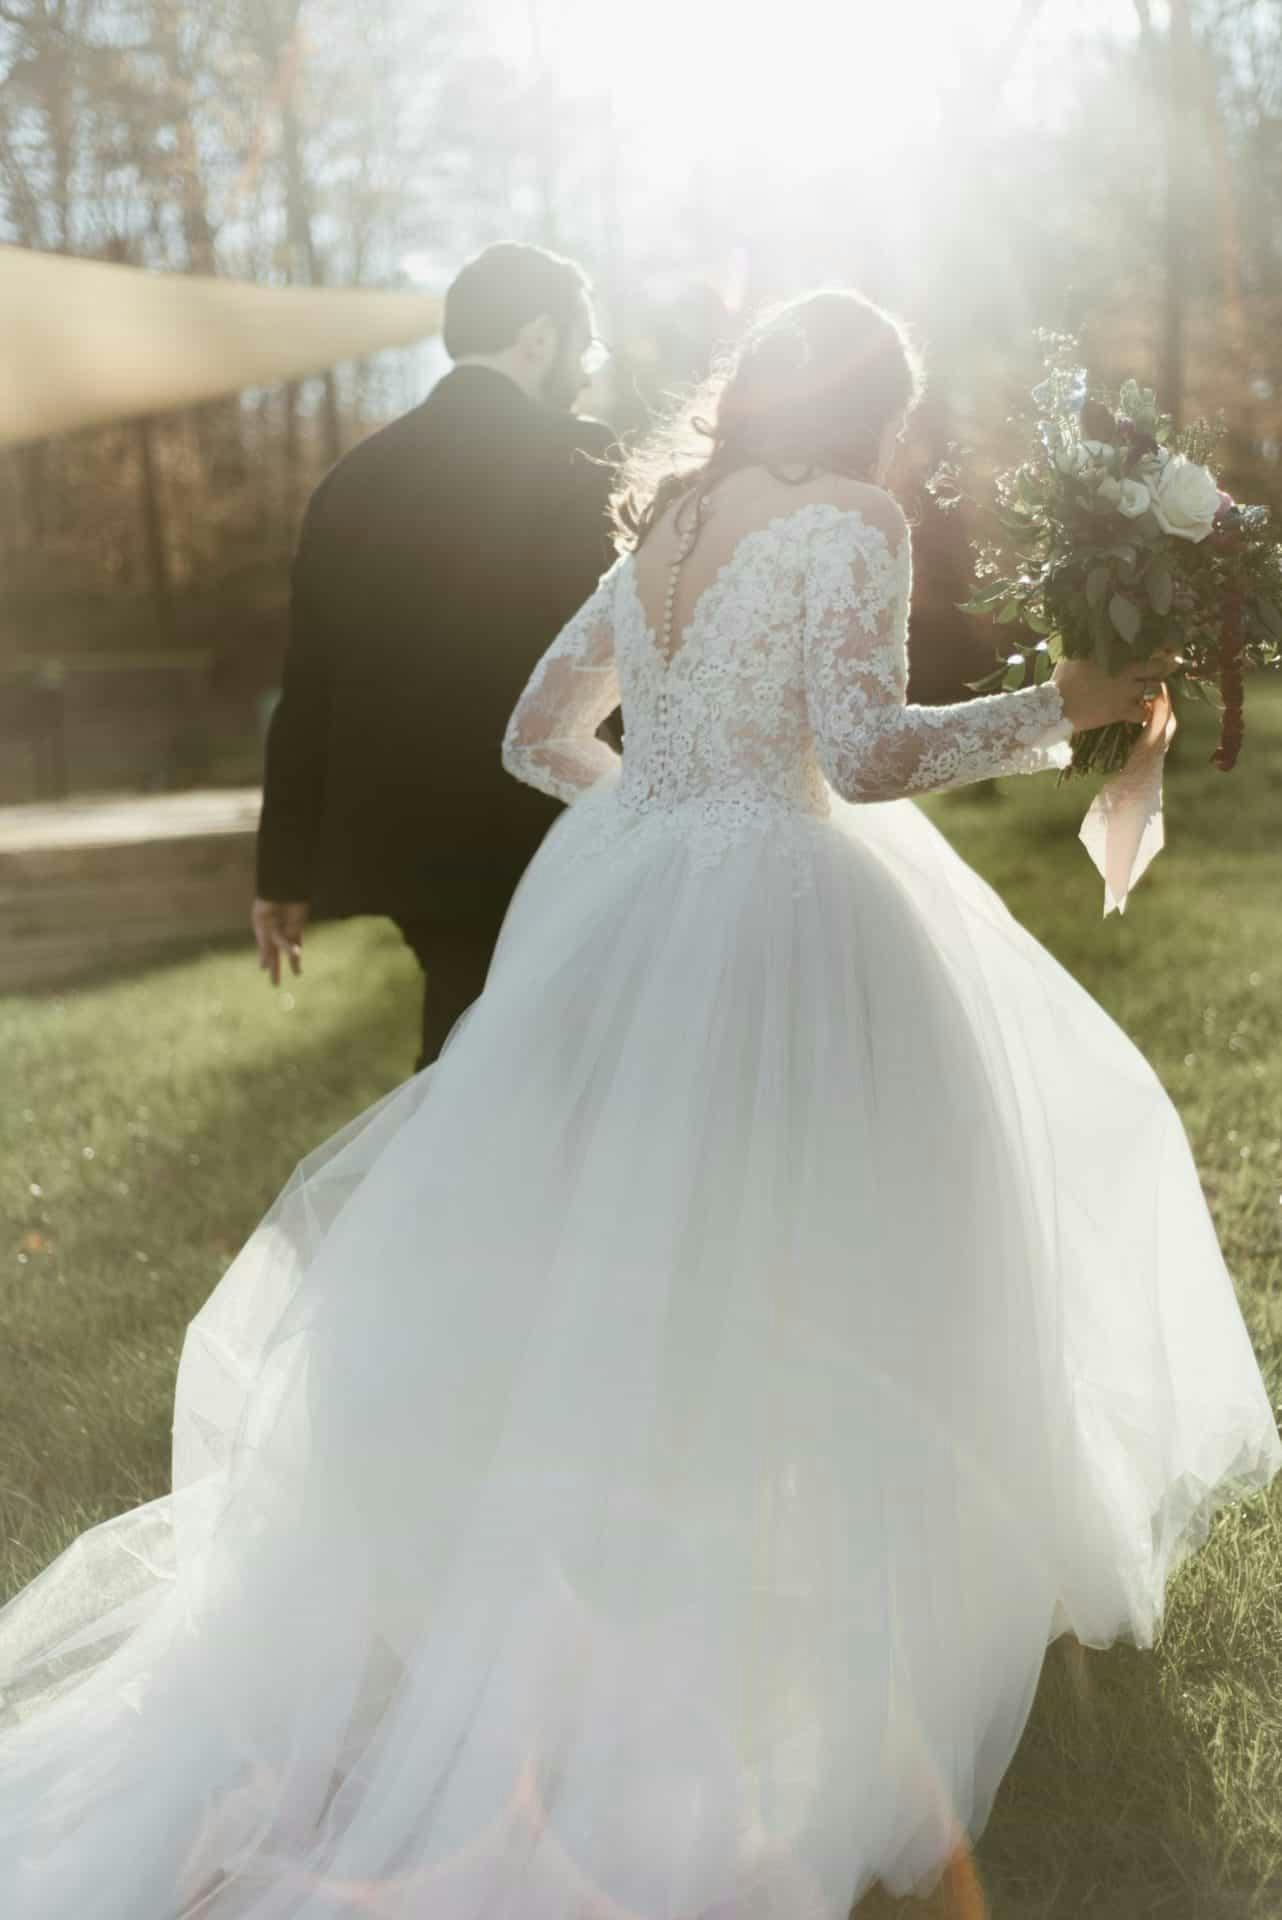 Photo of a bride and groom holding hands and walking